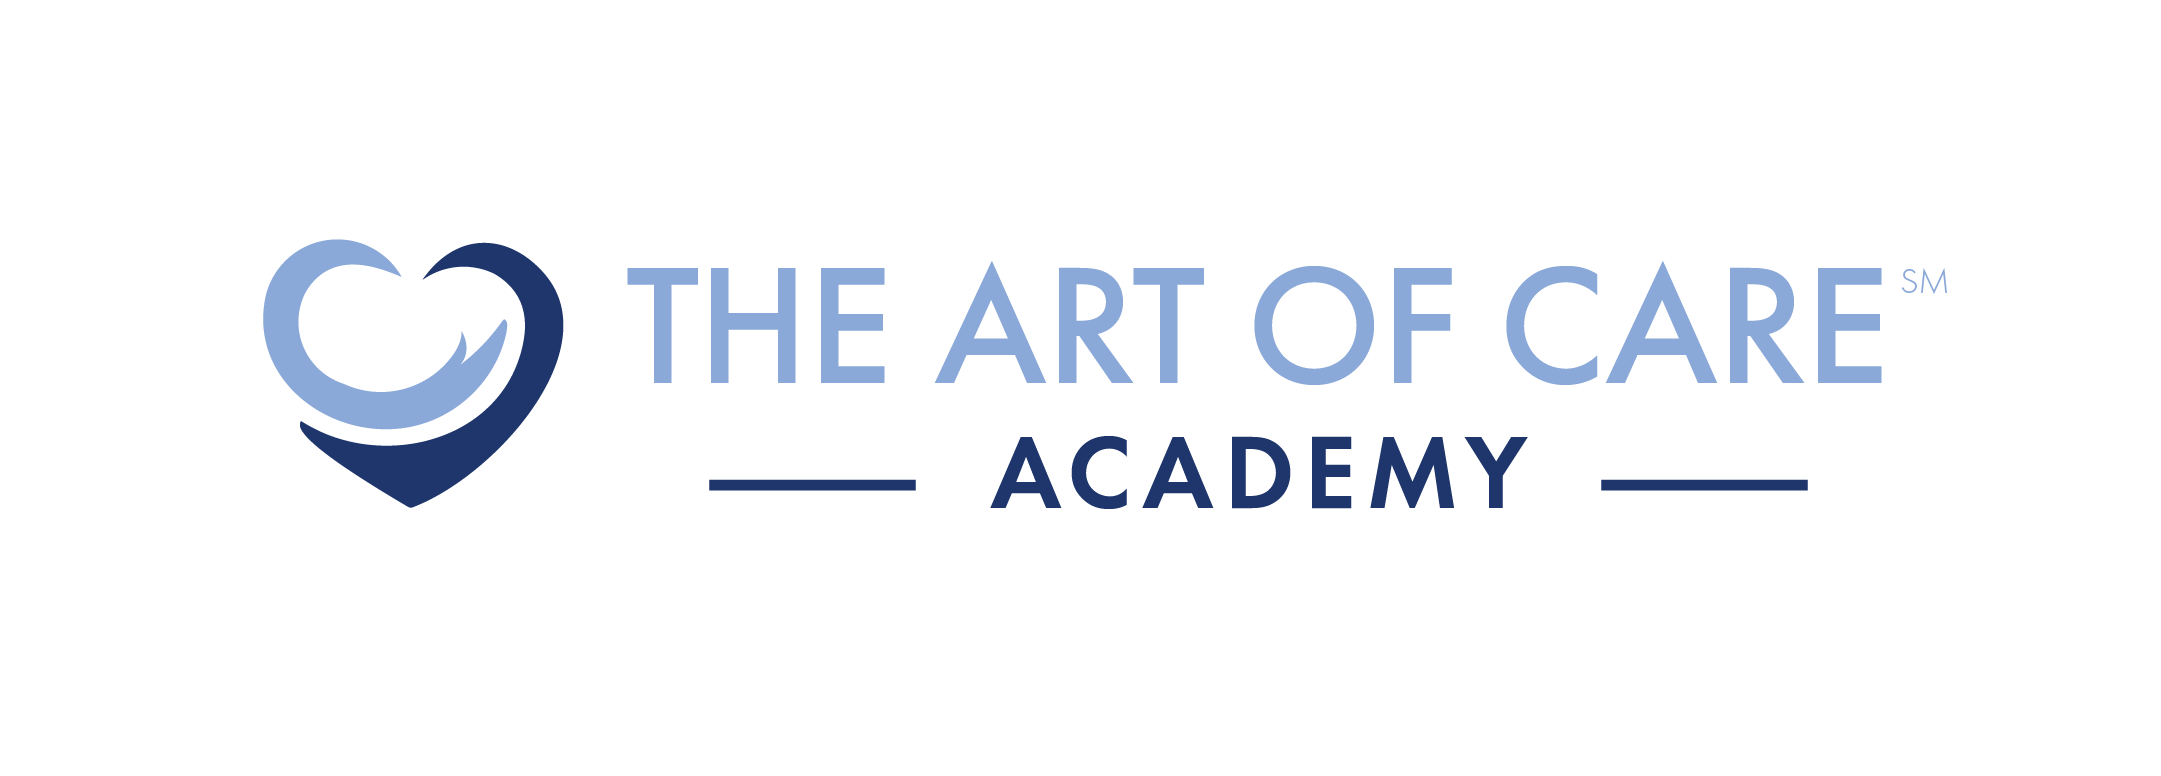 The Art of Care Academy